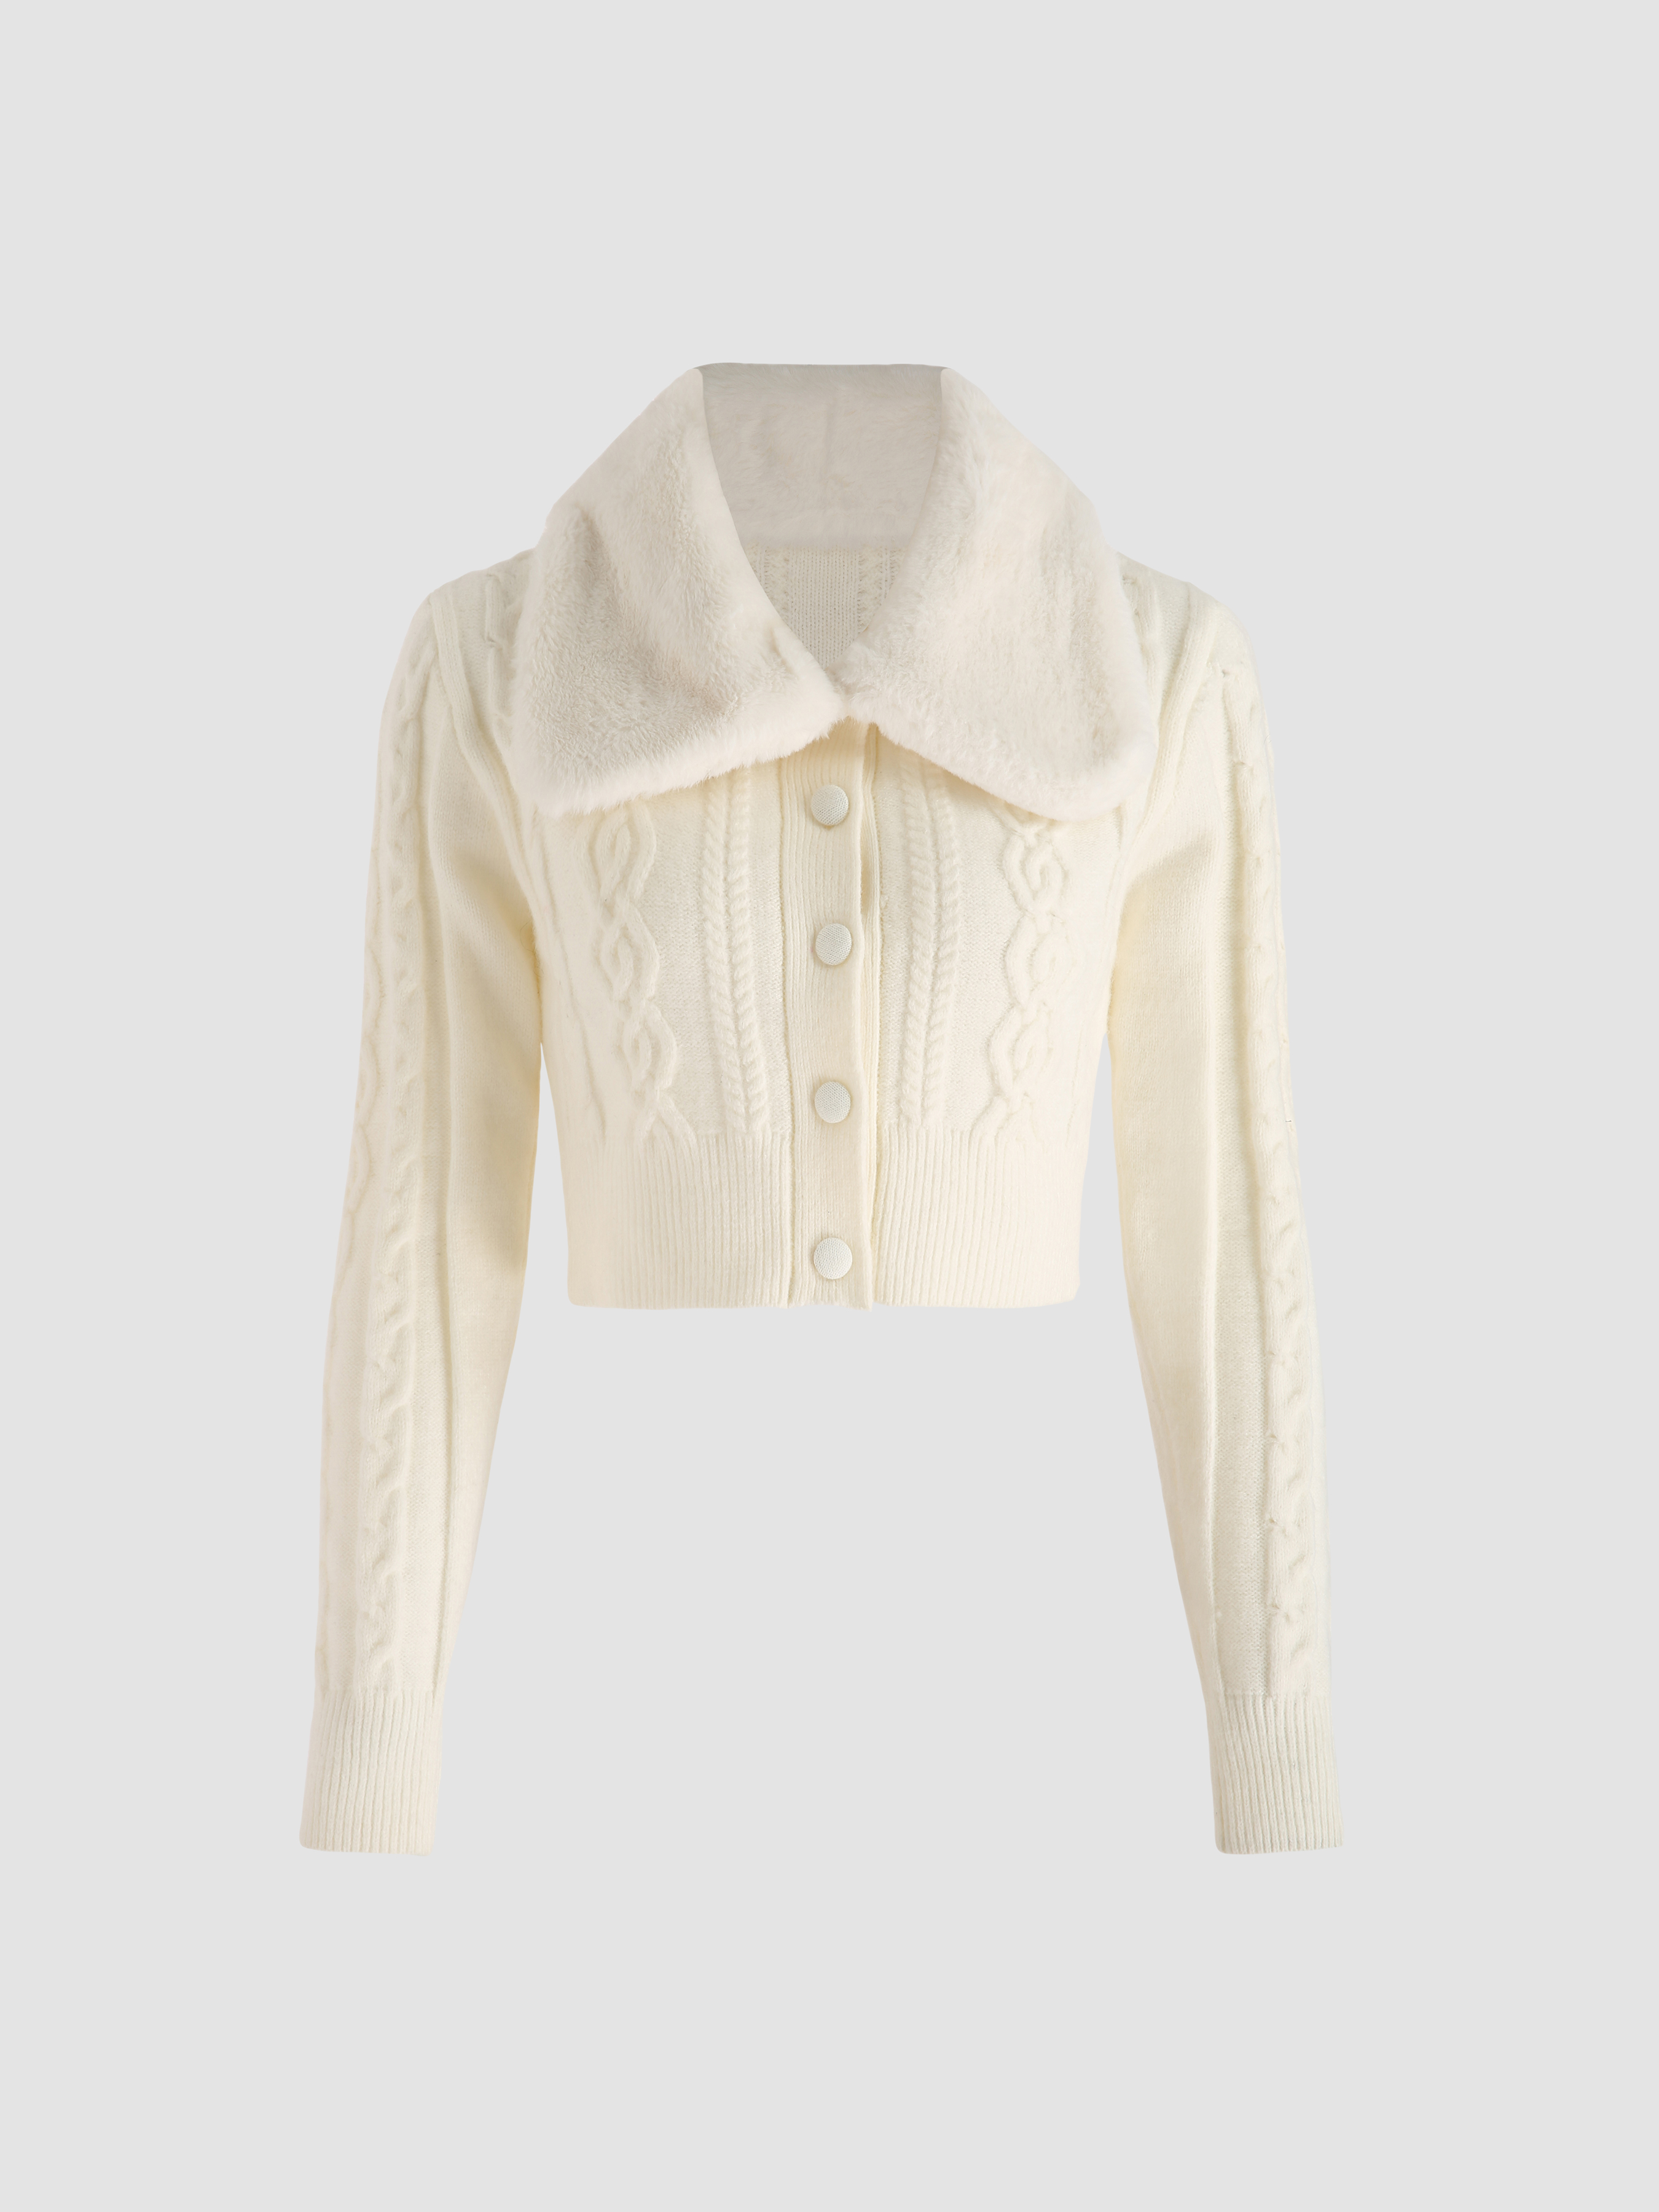 Romantic Cable Knit Jacket - Cider